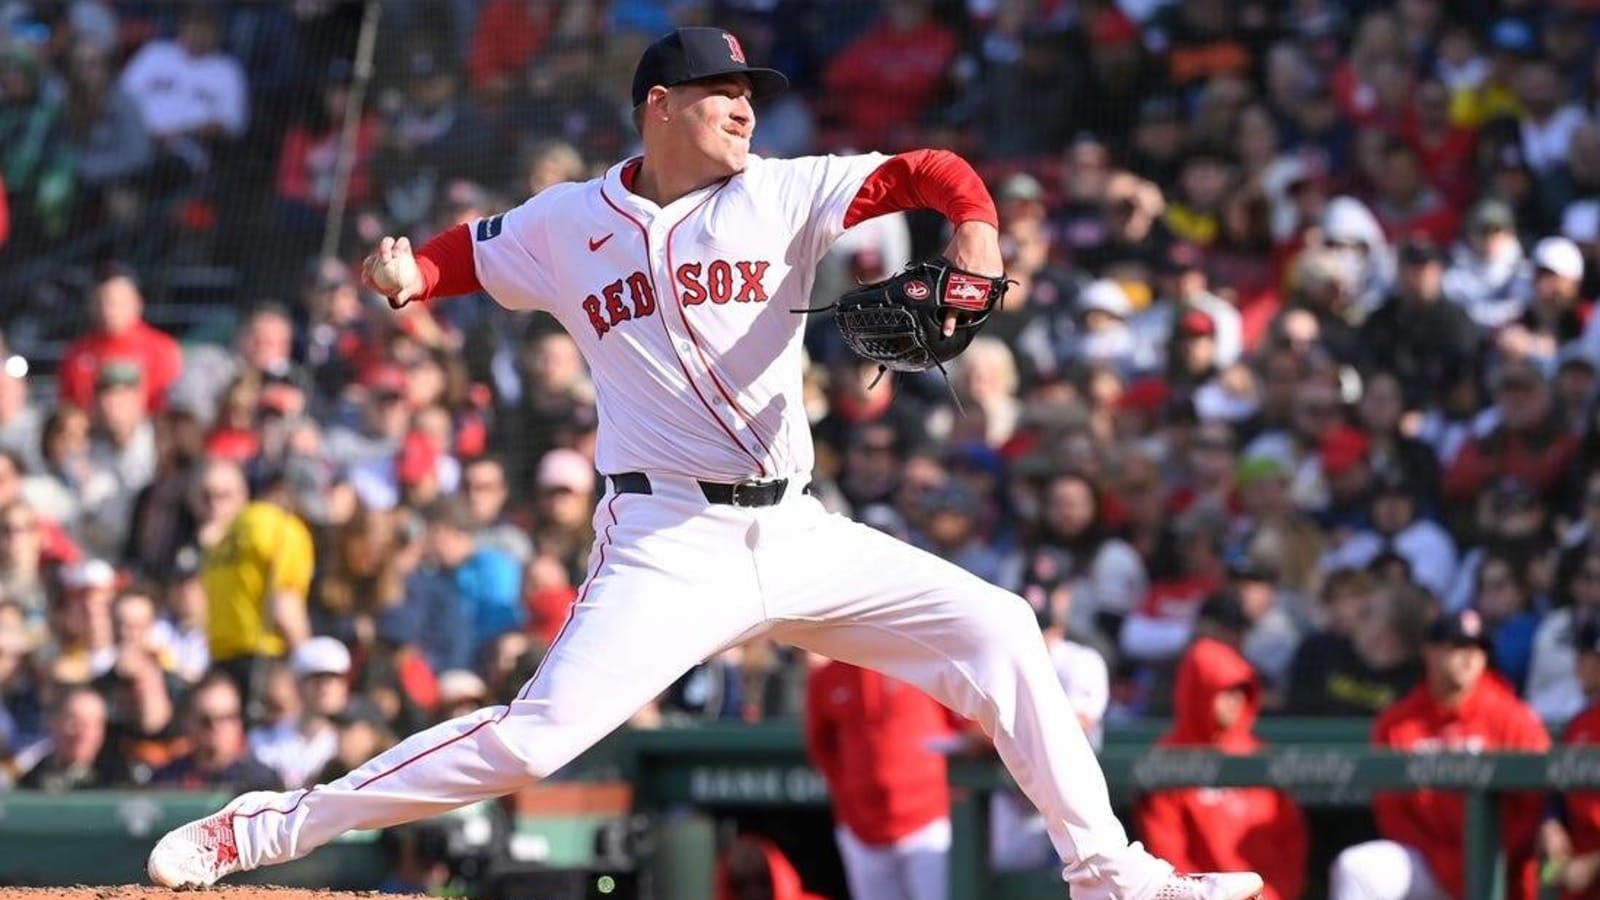 Riding strong pitching staff, Red Sox eye sweep of Giants